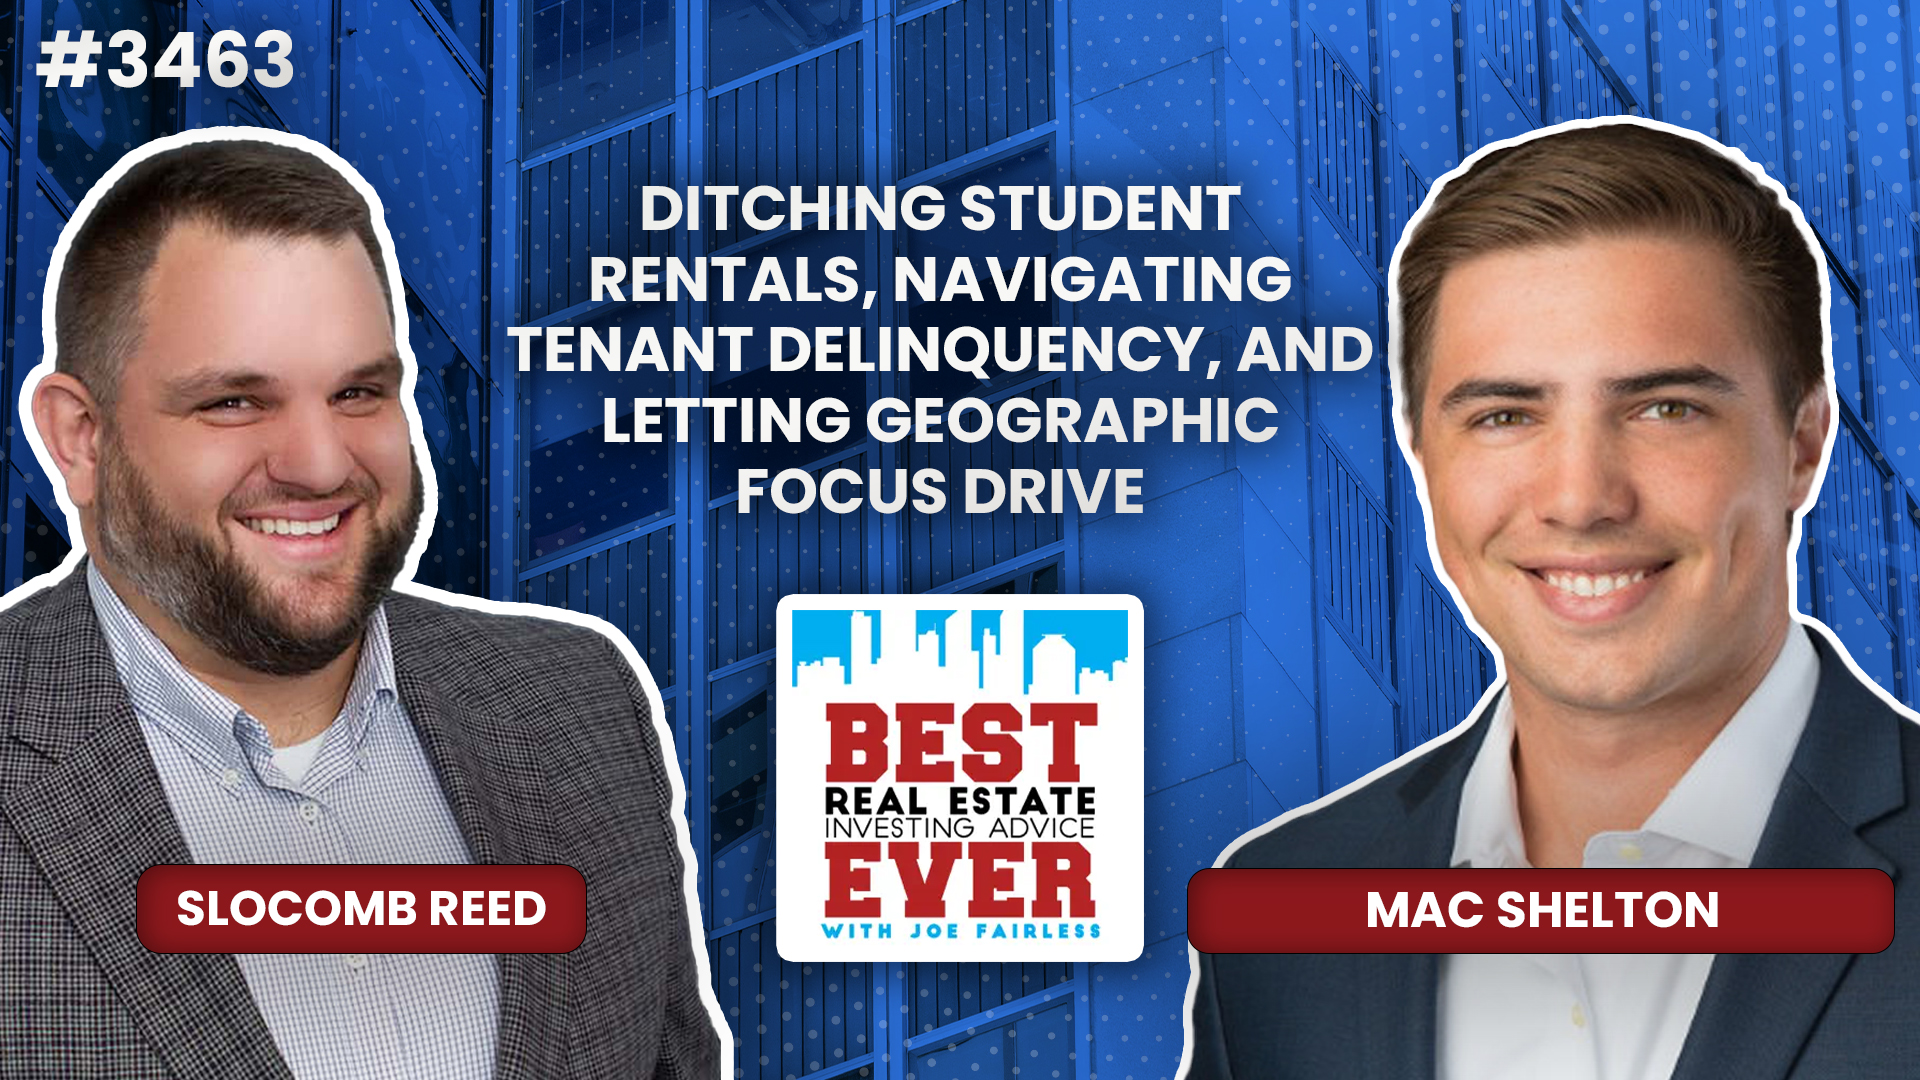 JF3463: Ditching Student Rentals, Navigating Tenant Delinquency, and Letting Geographic Focus Drive ft. Mac Shelton